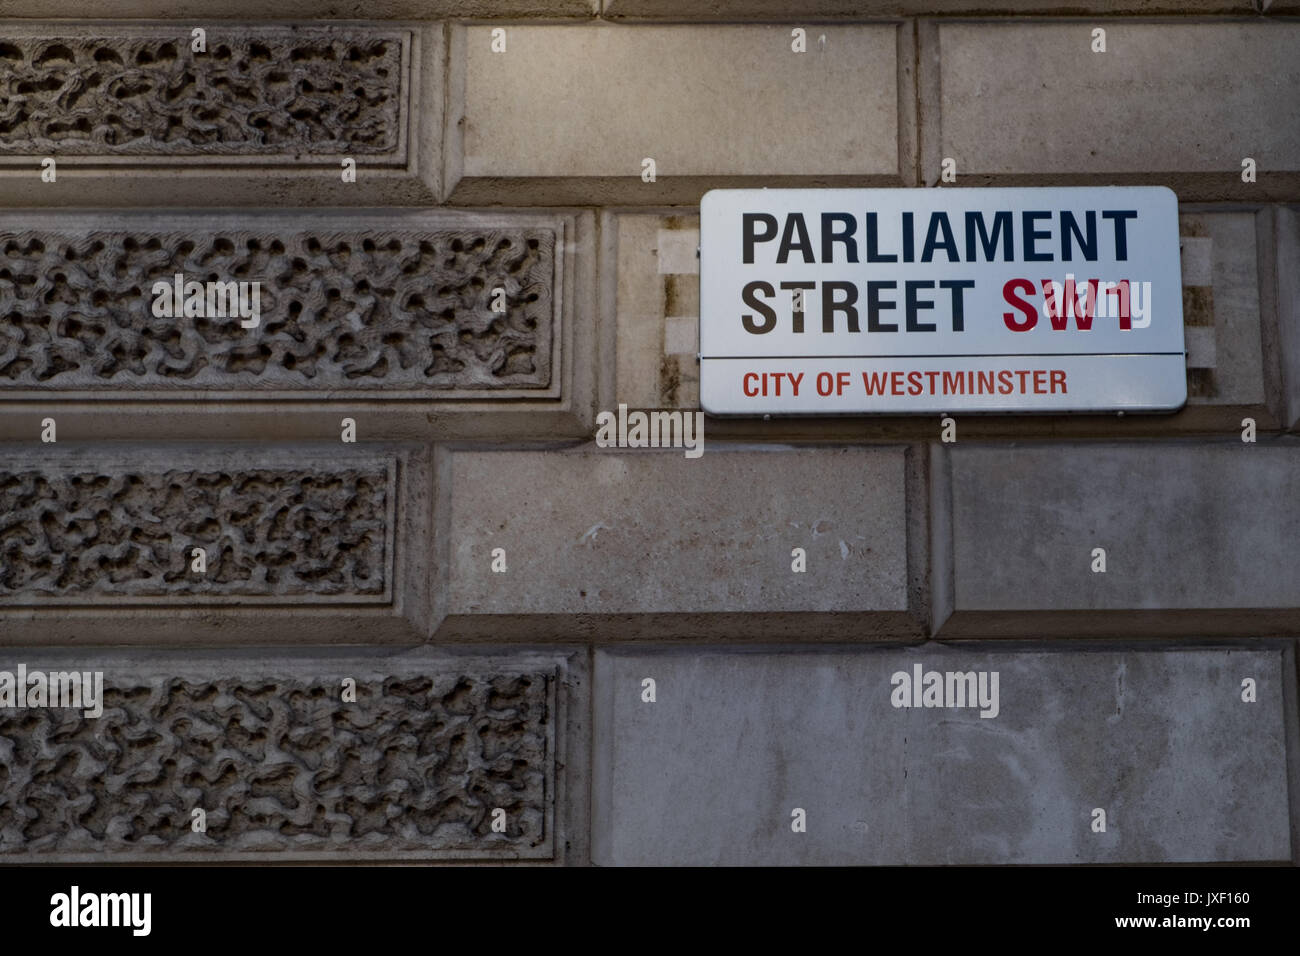 Street sign for Parliament Street in London Stock Photo